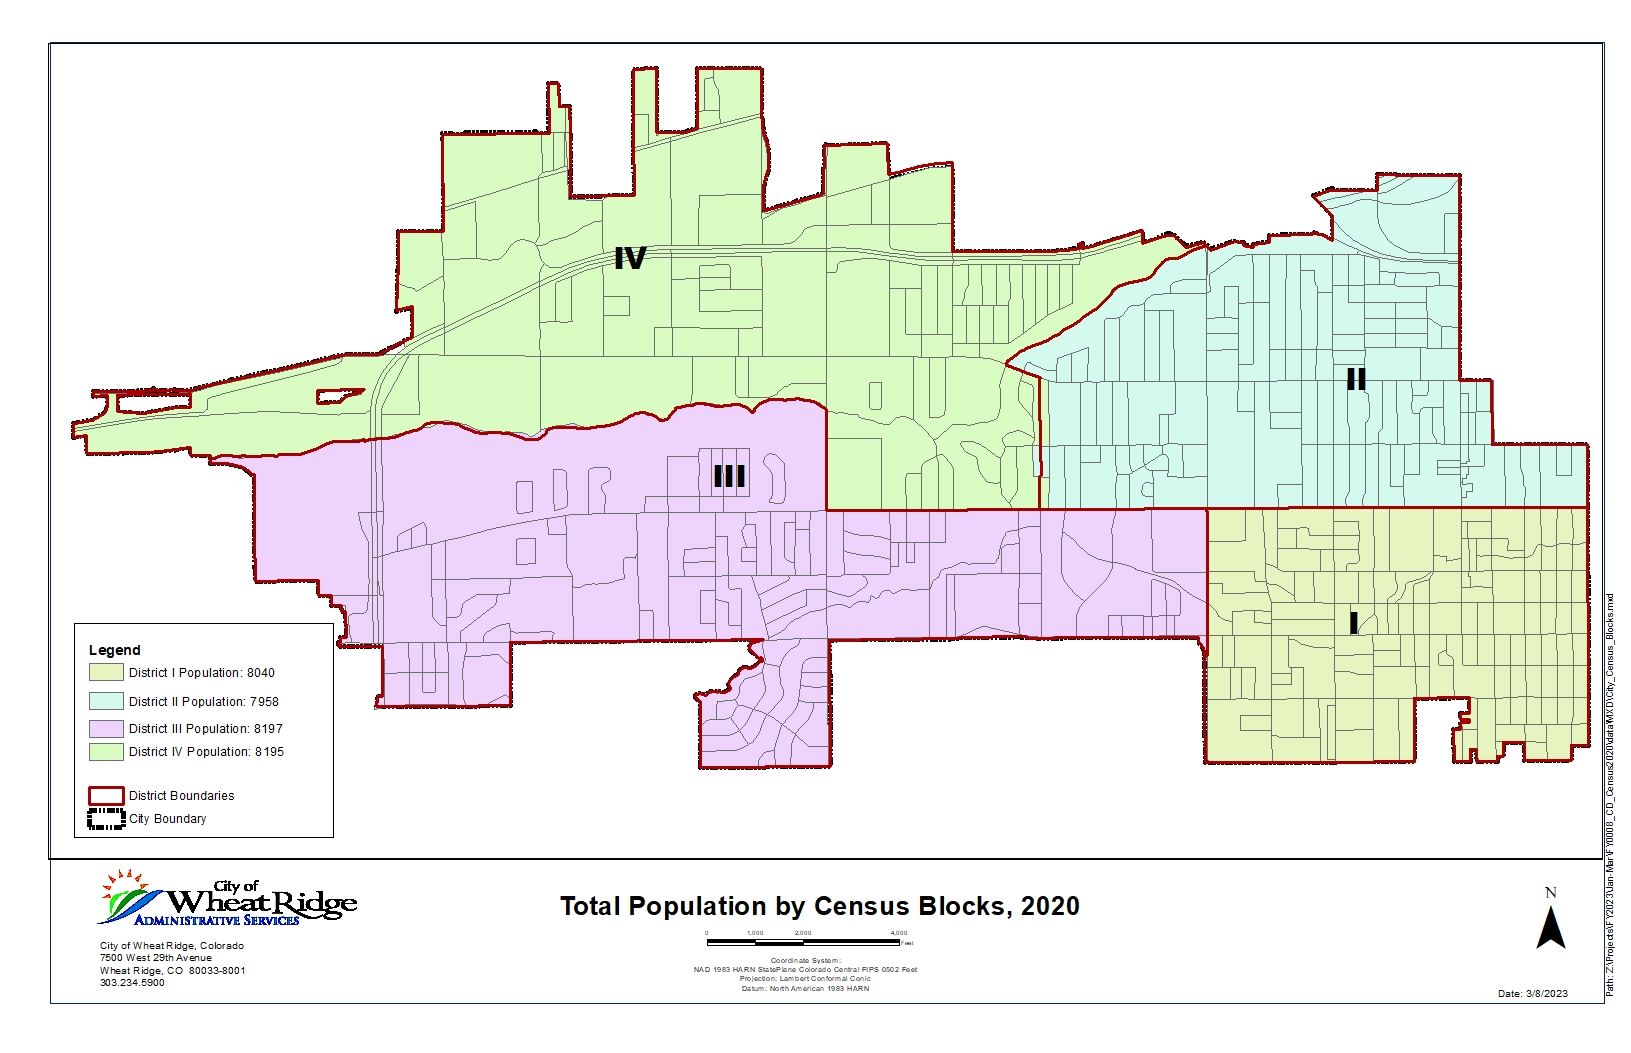 A map showing the City Council district and census block boundaries with total population counts.